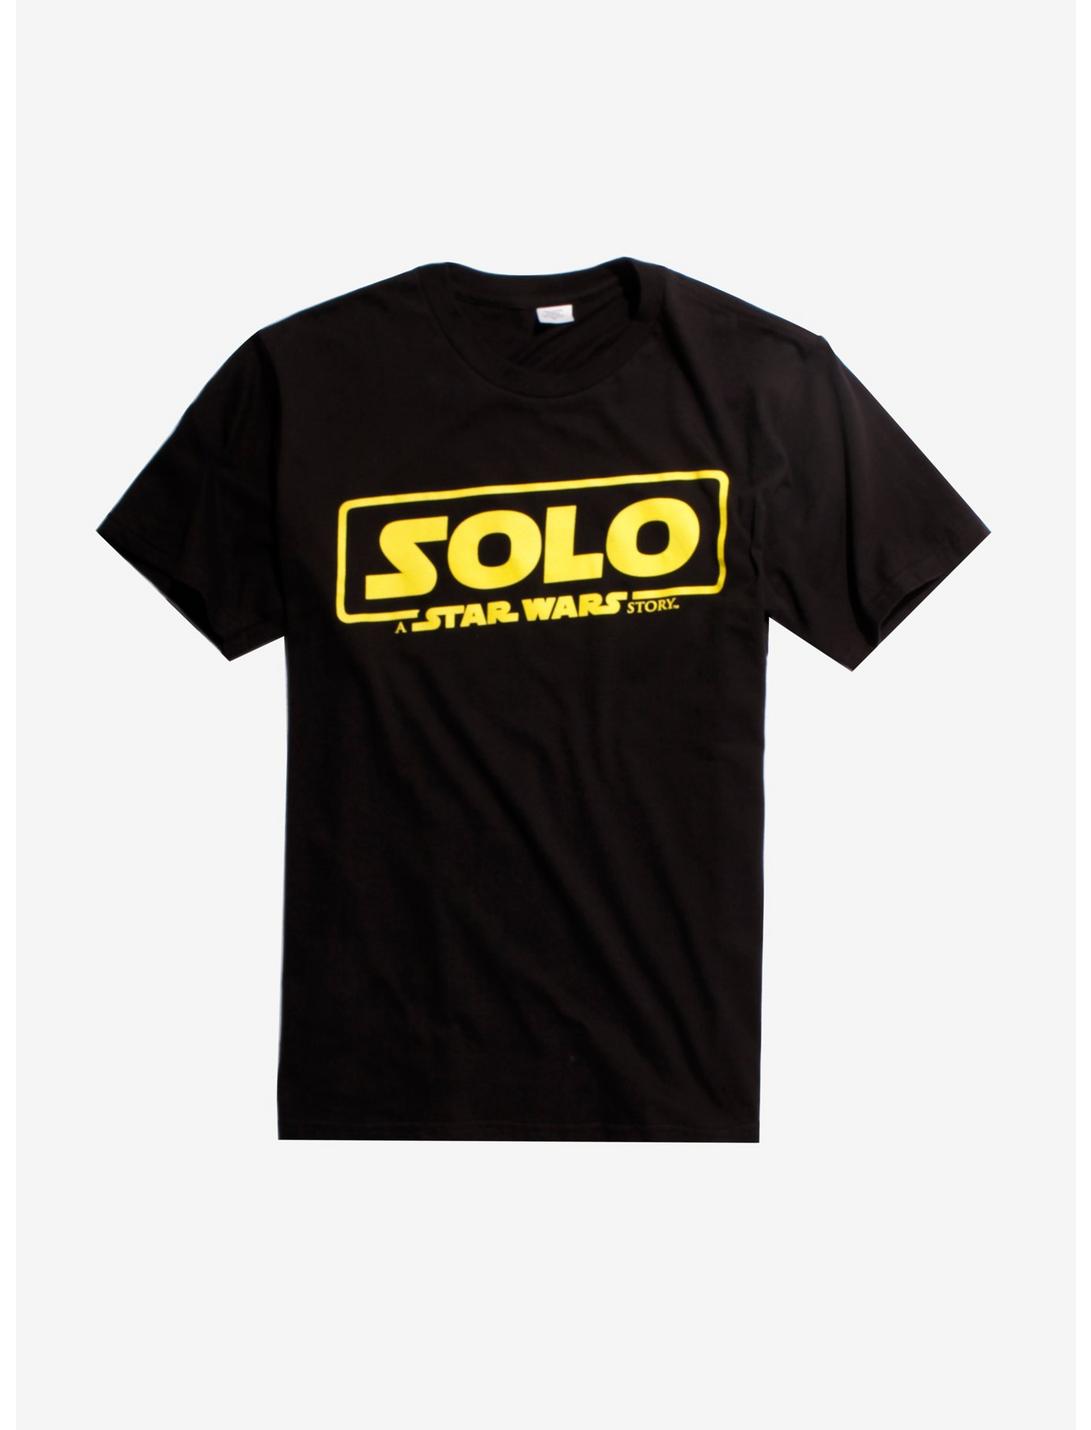 Solo: A Star Wars Story Title T-Shirt Hot Topic Exclusive, BLACK, hi-res